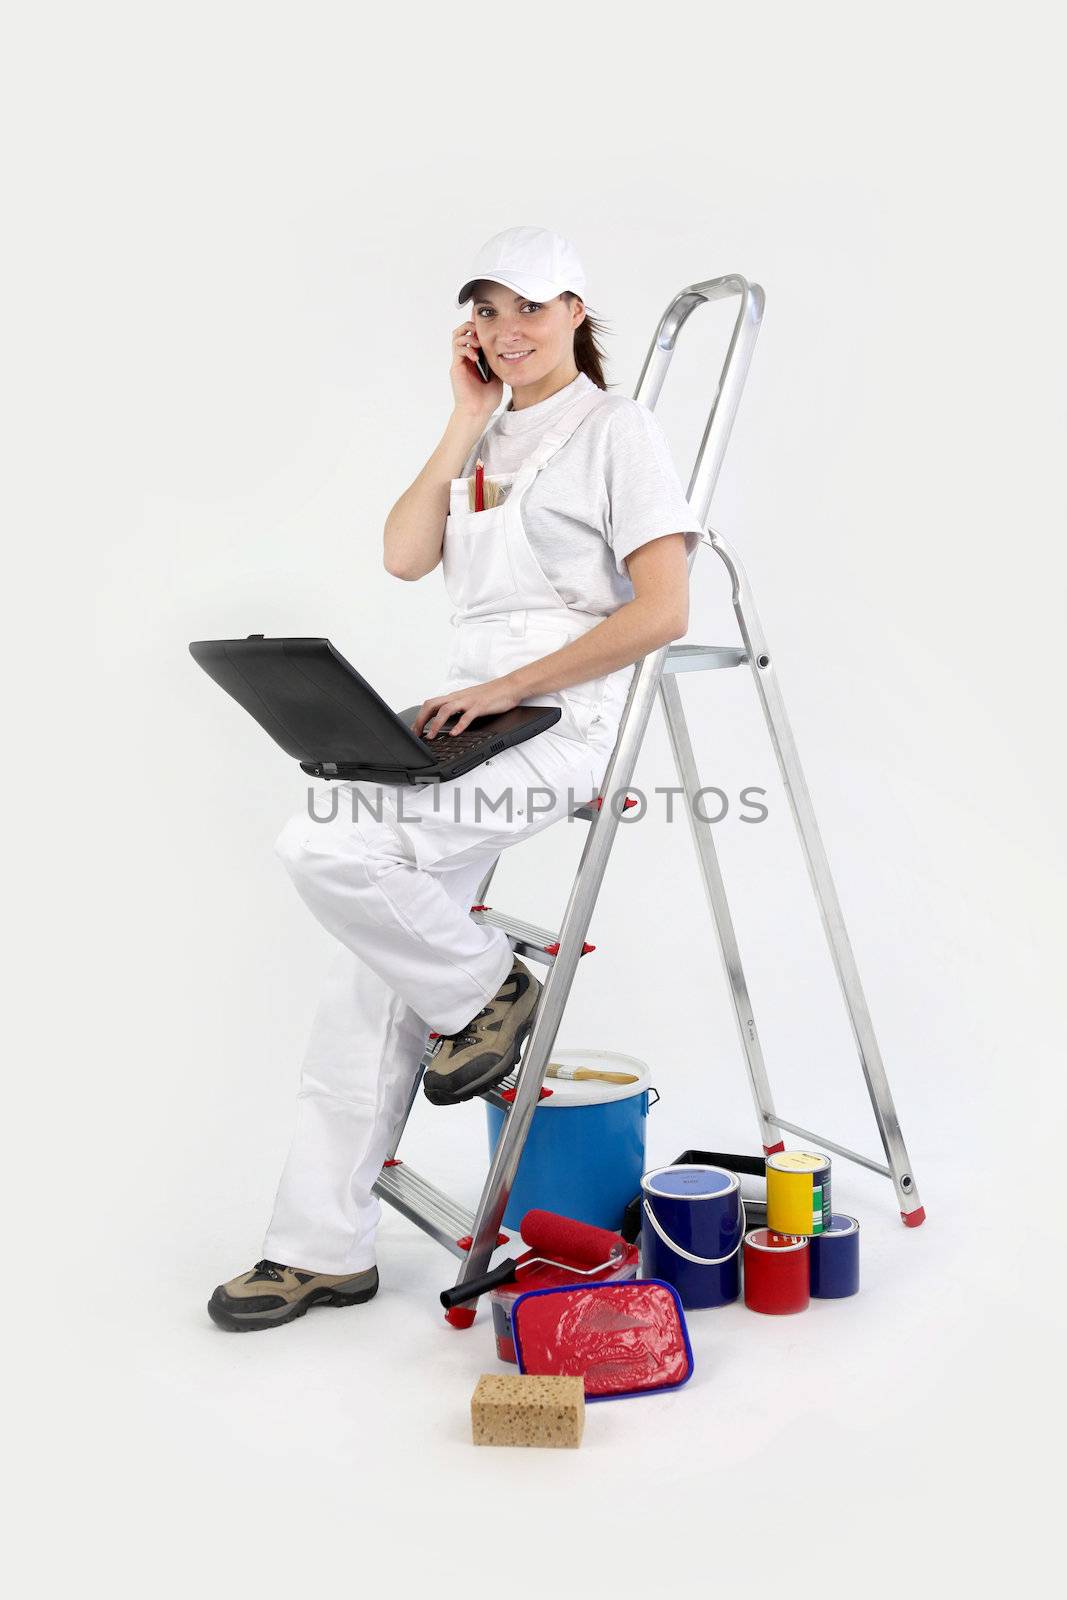 craftswoman painter working on her laptop and talking on her cell